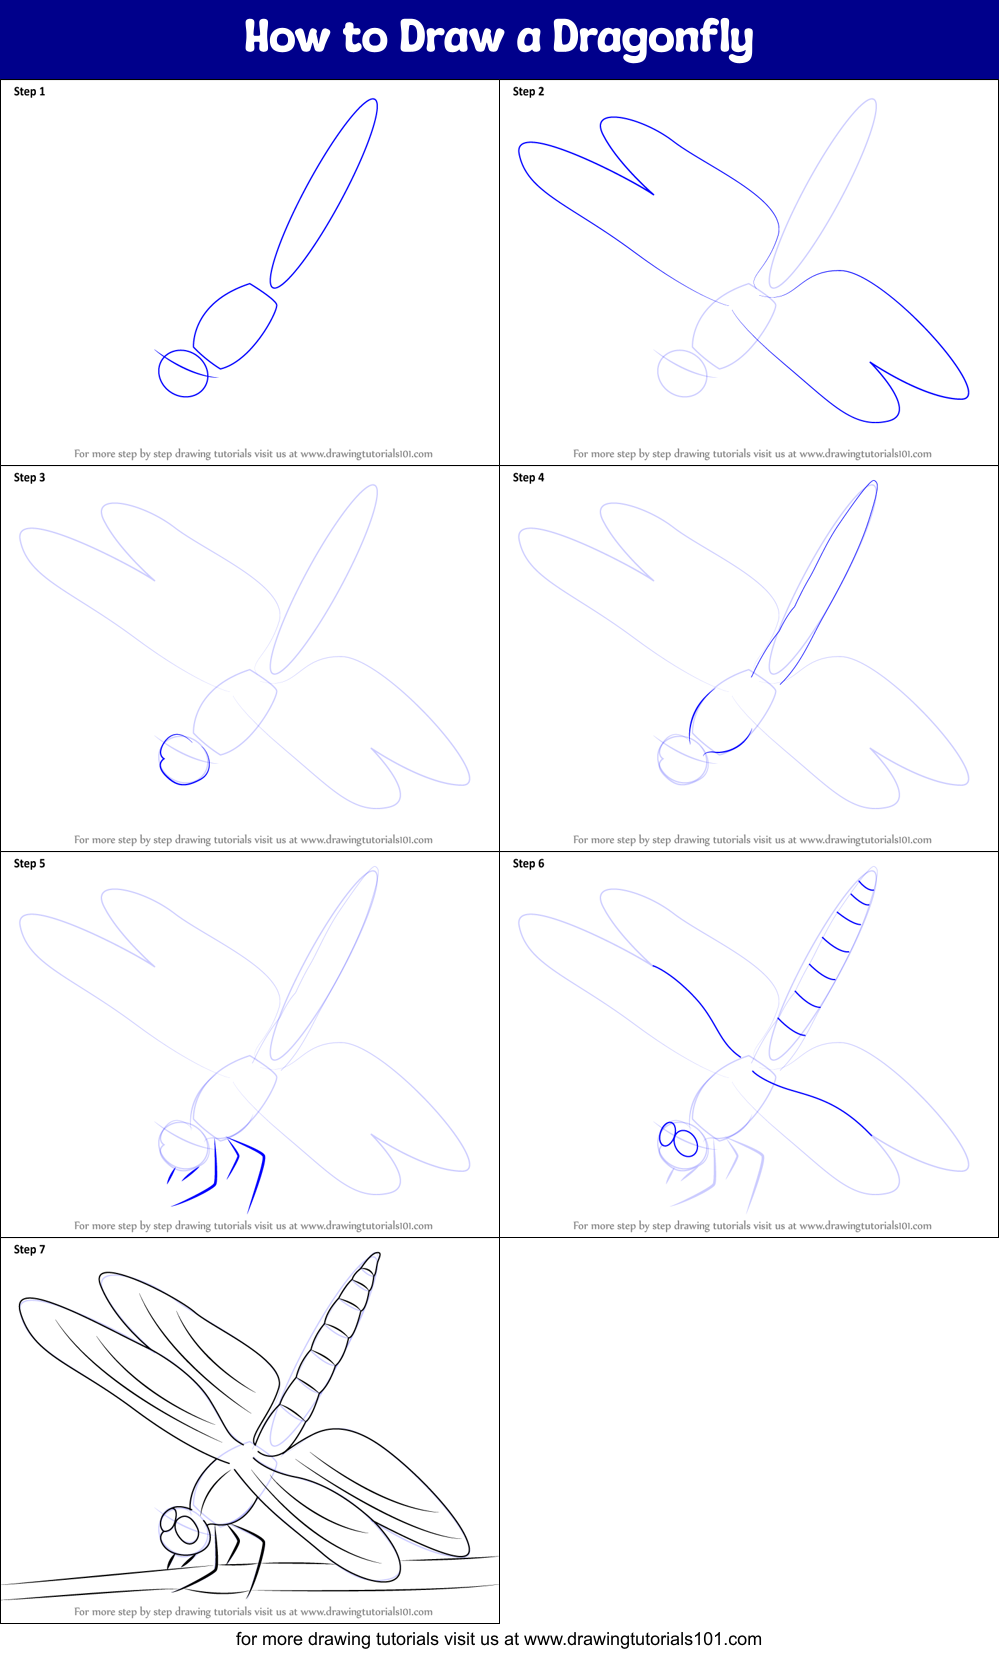 How to Draw a Dragonfly printable step by step drawing sheet